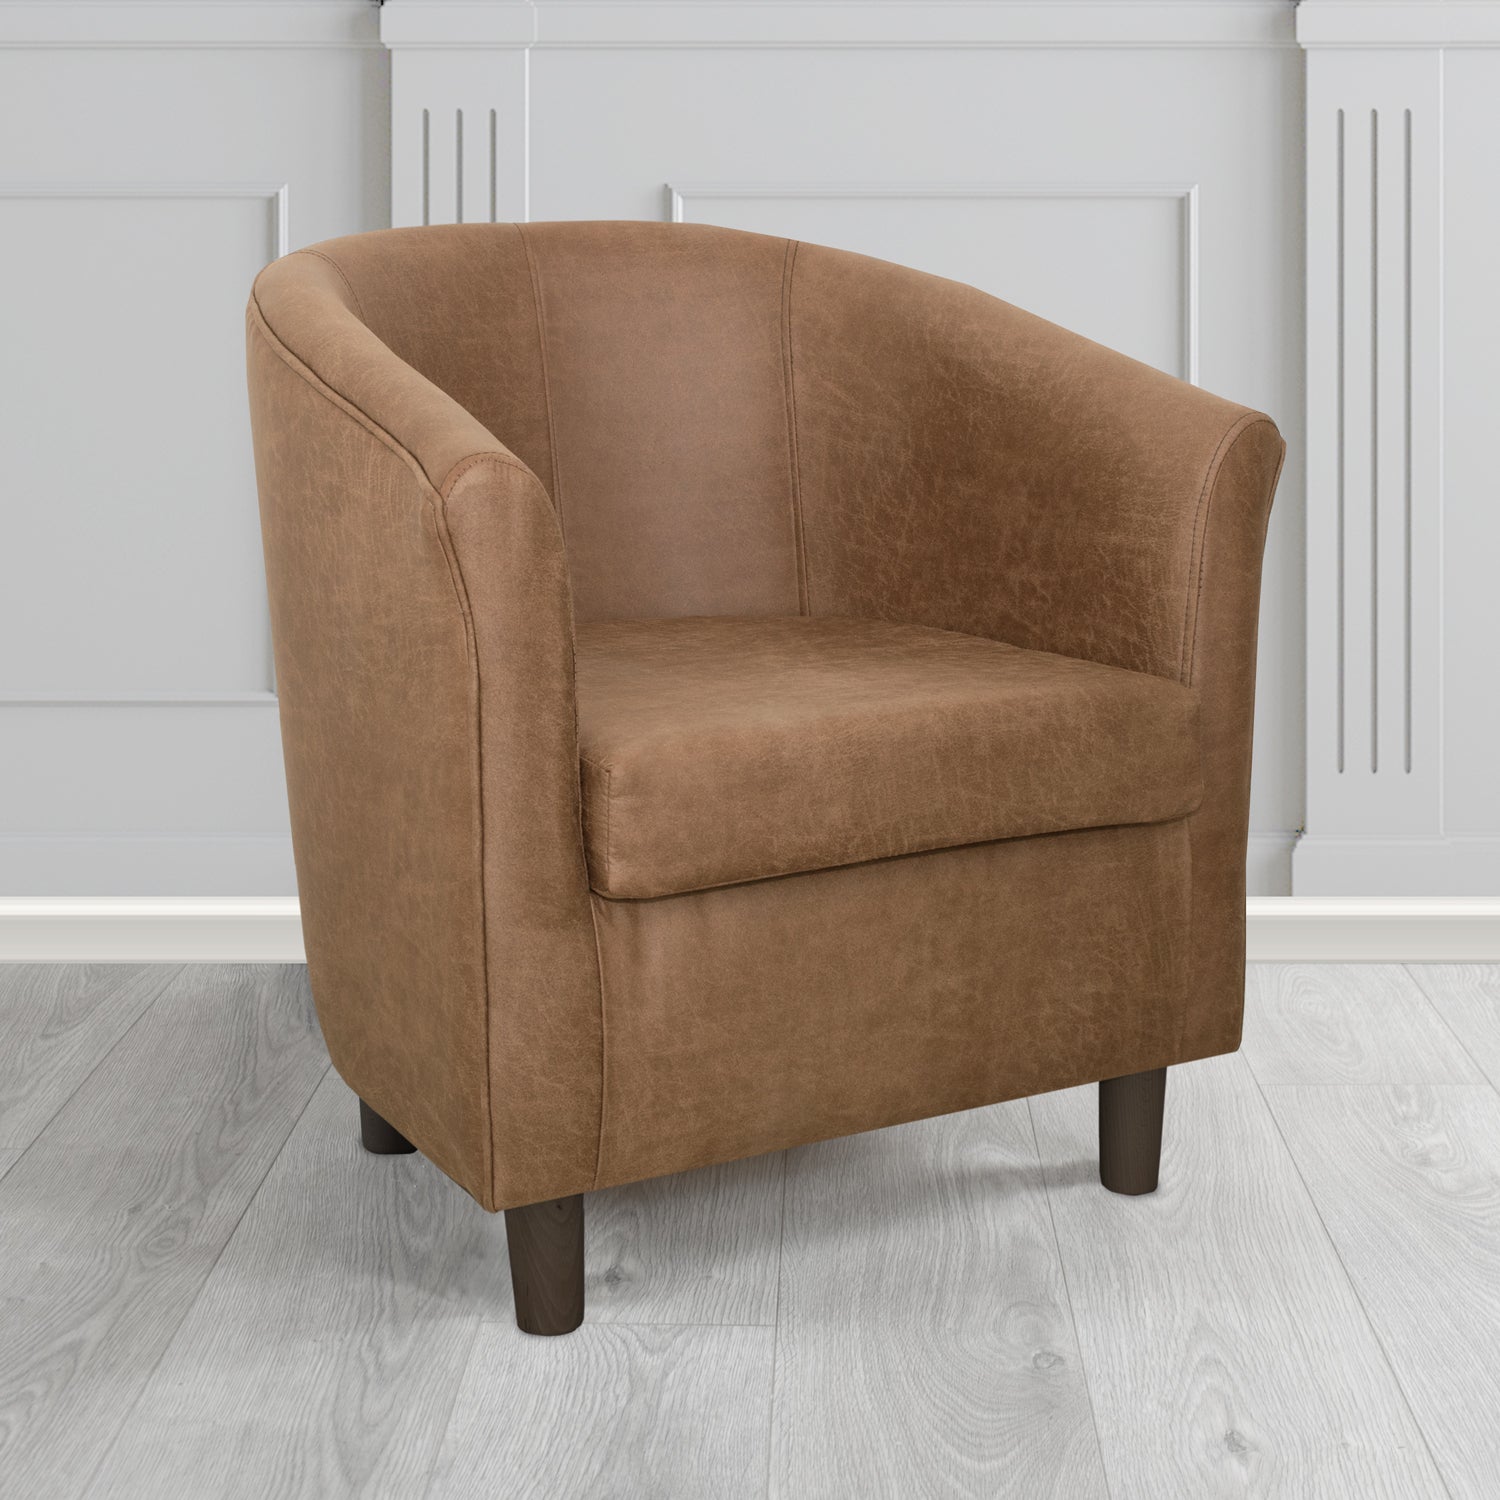 Tuscany Rhodeo Tan Faux Leather Tub Chair